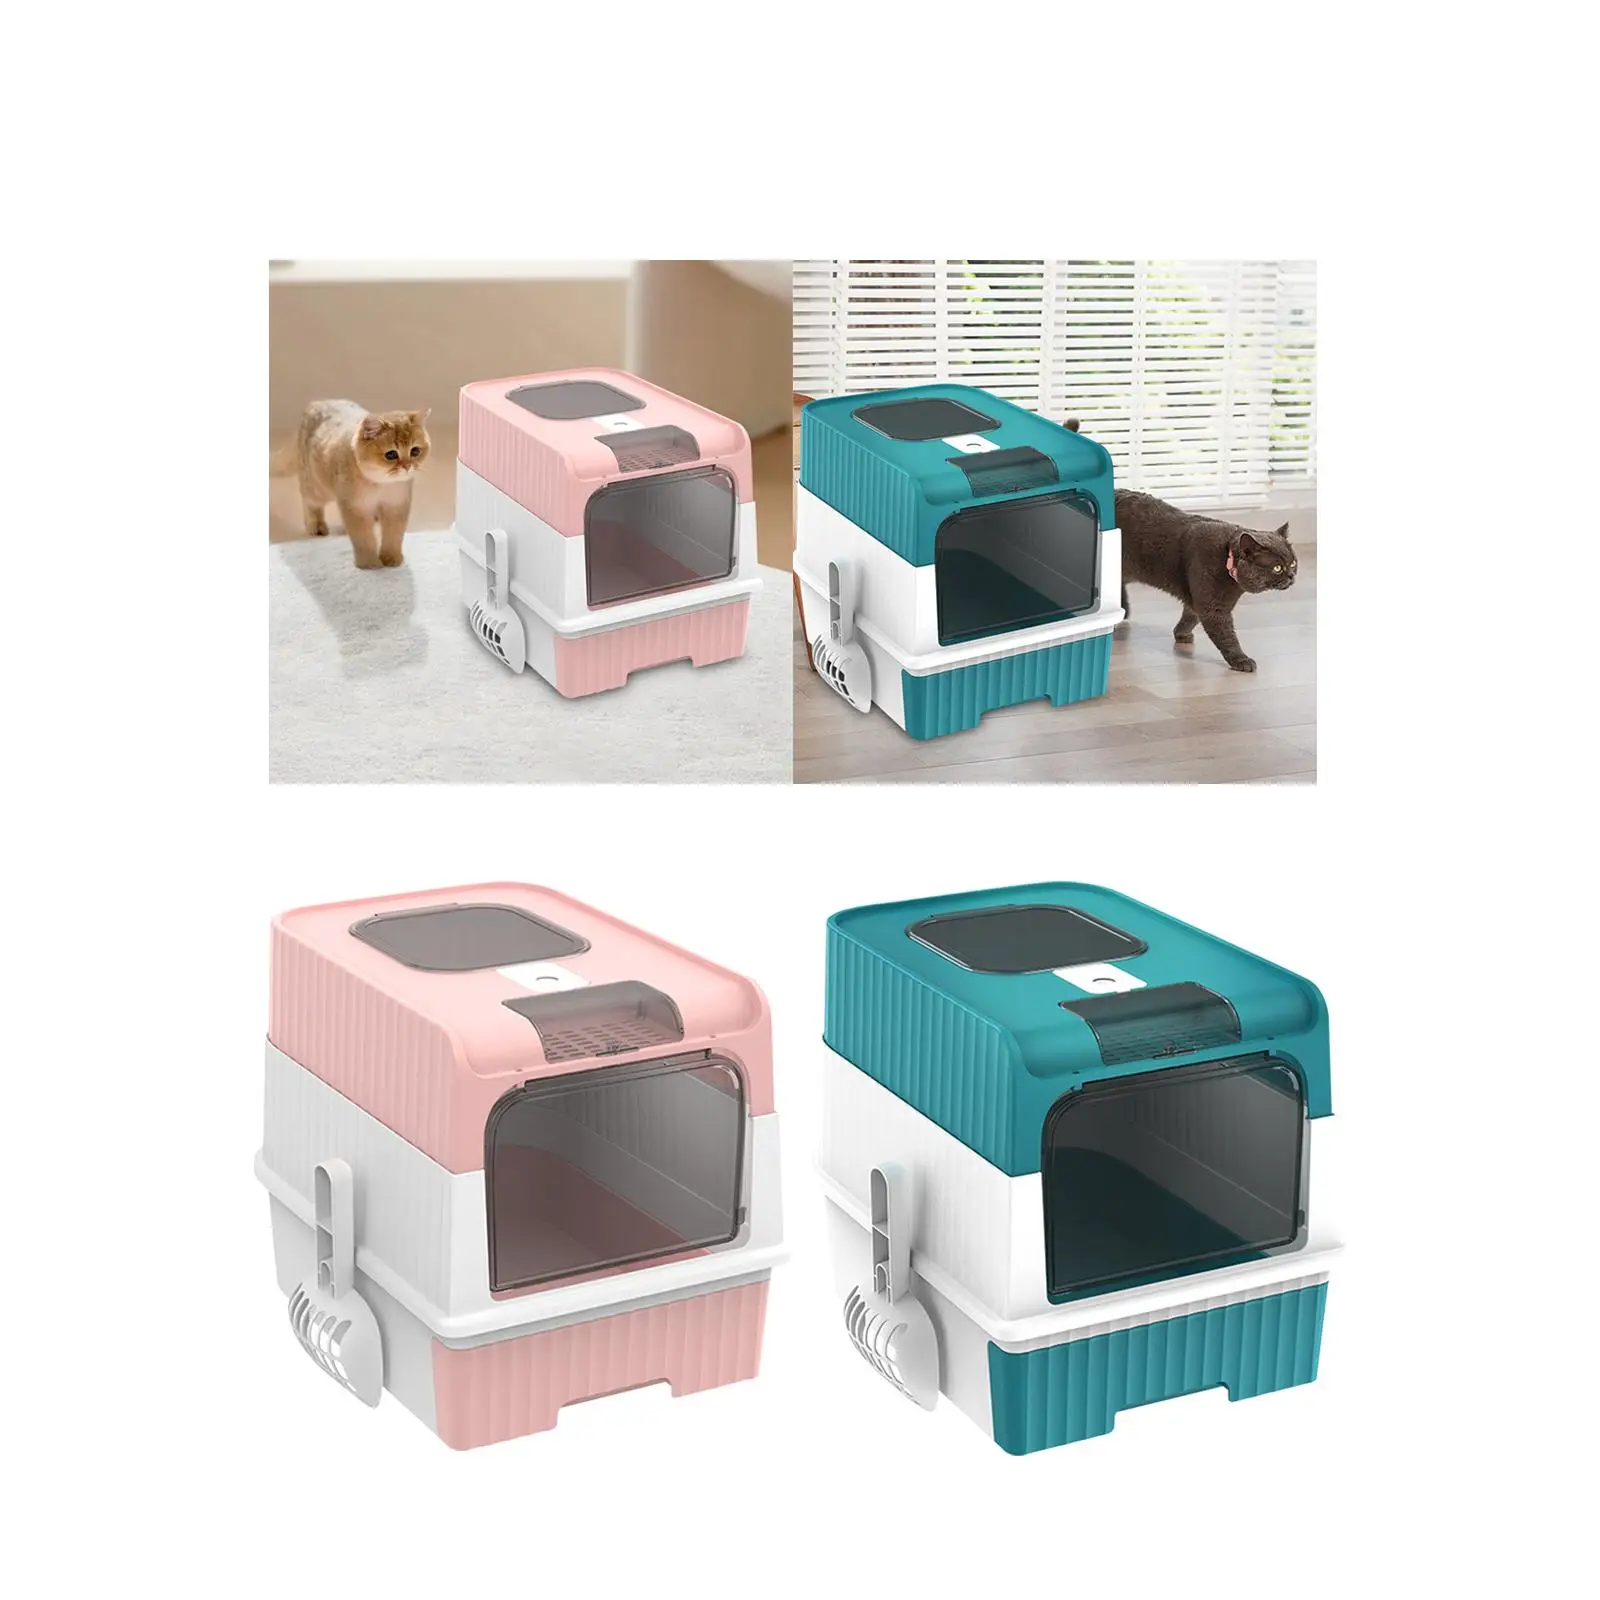 Hooded Cat Litter Boxes with Portable Privacy Removable Anti Splashing Pet Supplies Fully Enclosed with Lid Kitten Potty